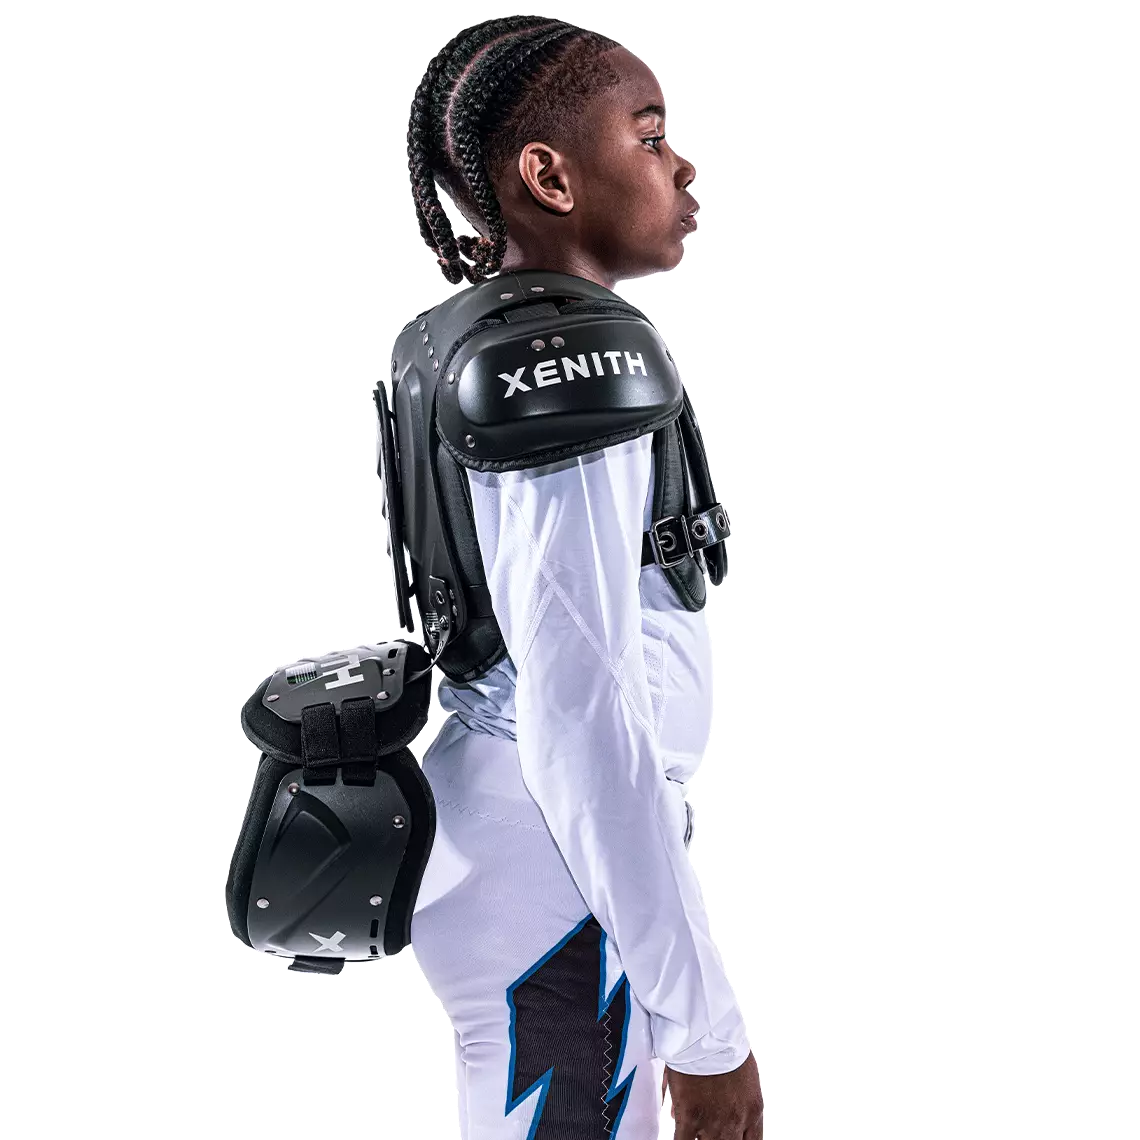 Side facing view of player wearing black Xenith core guard with black adjustment straps over shoulders.